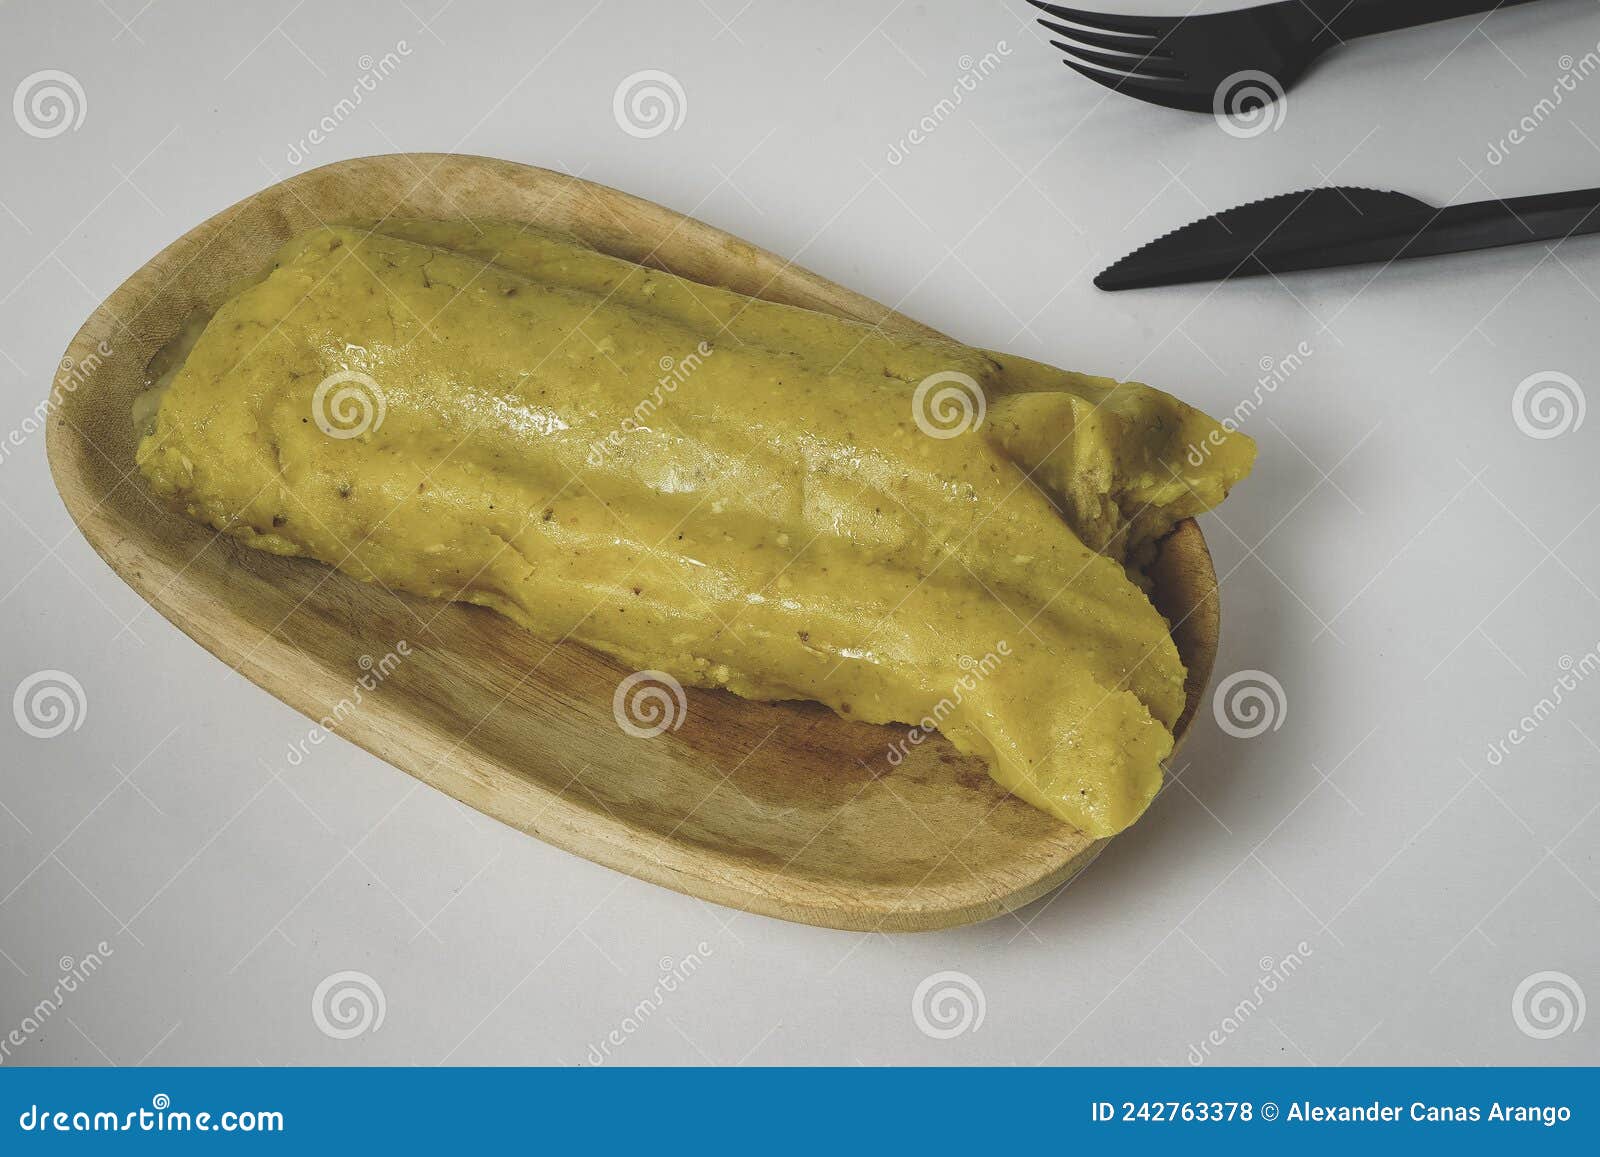 colombian tamale recipe with steamed banana leaves